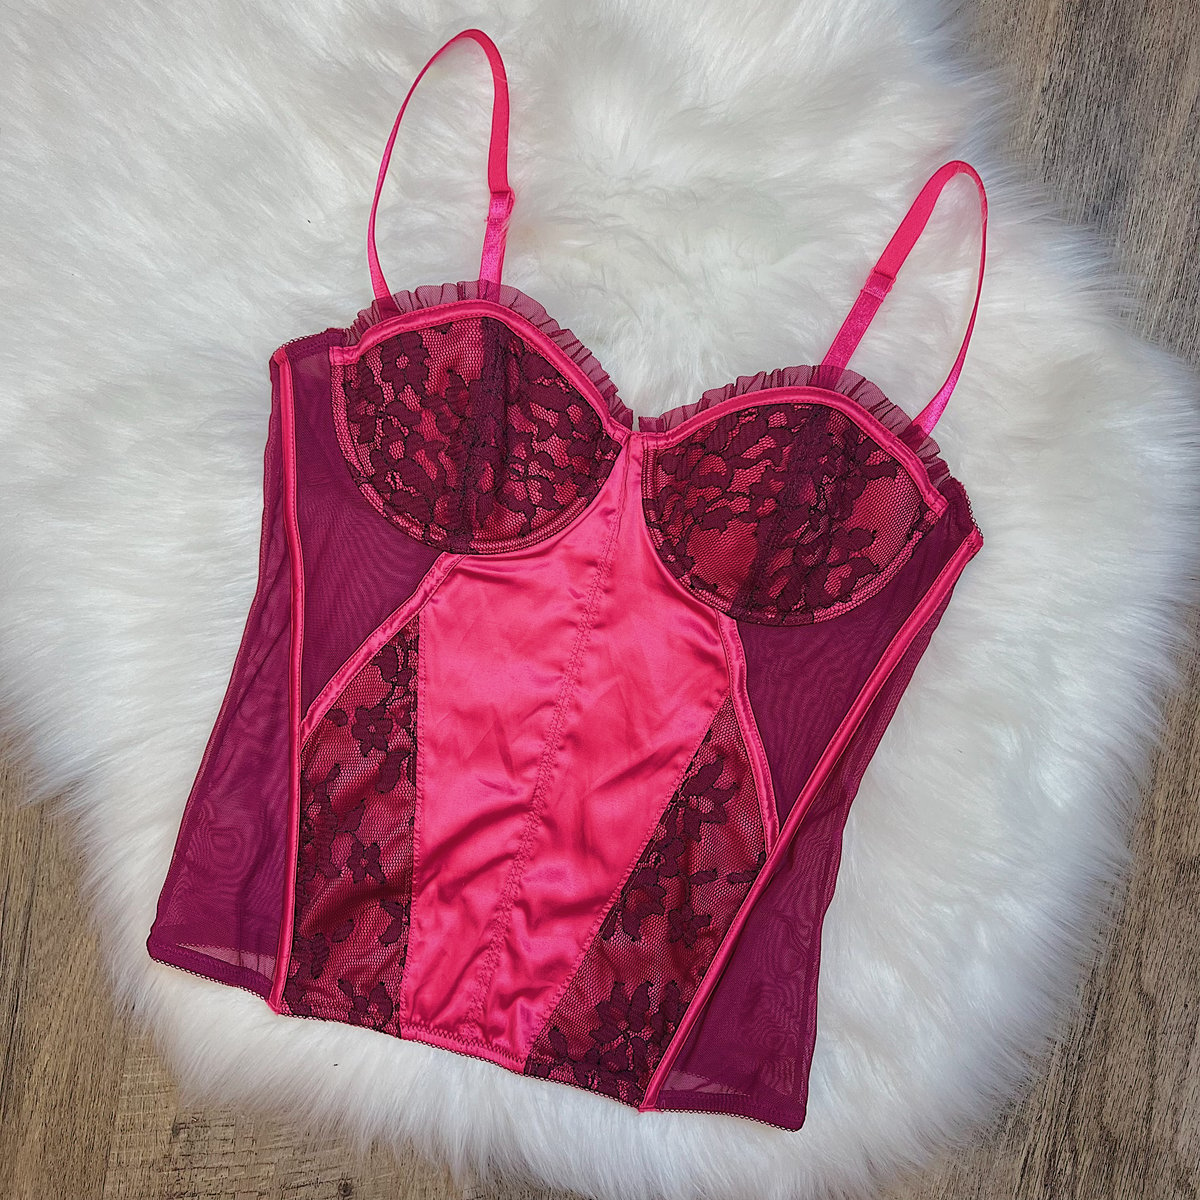 SUPER STAR BUSTIER *HOT PINK* – Laced with Sparkles